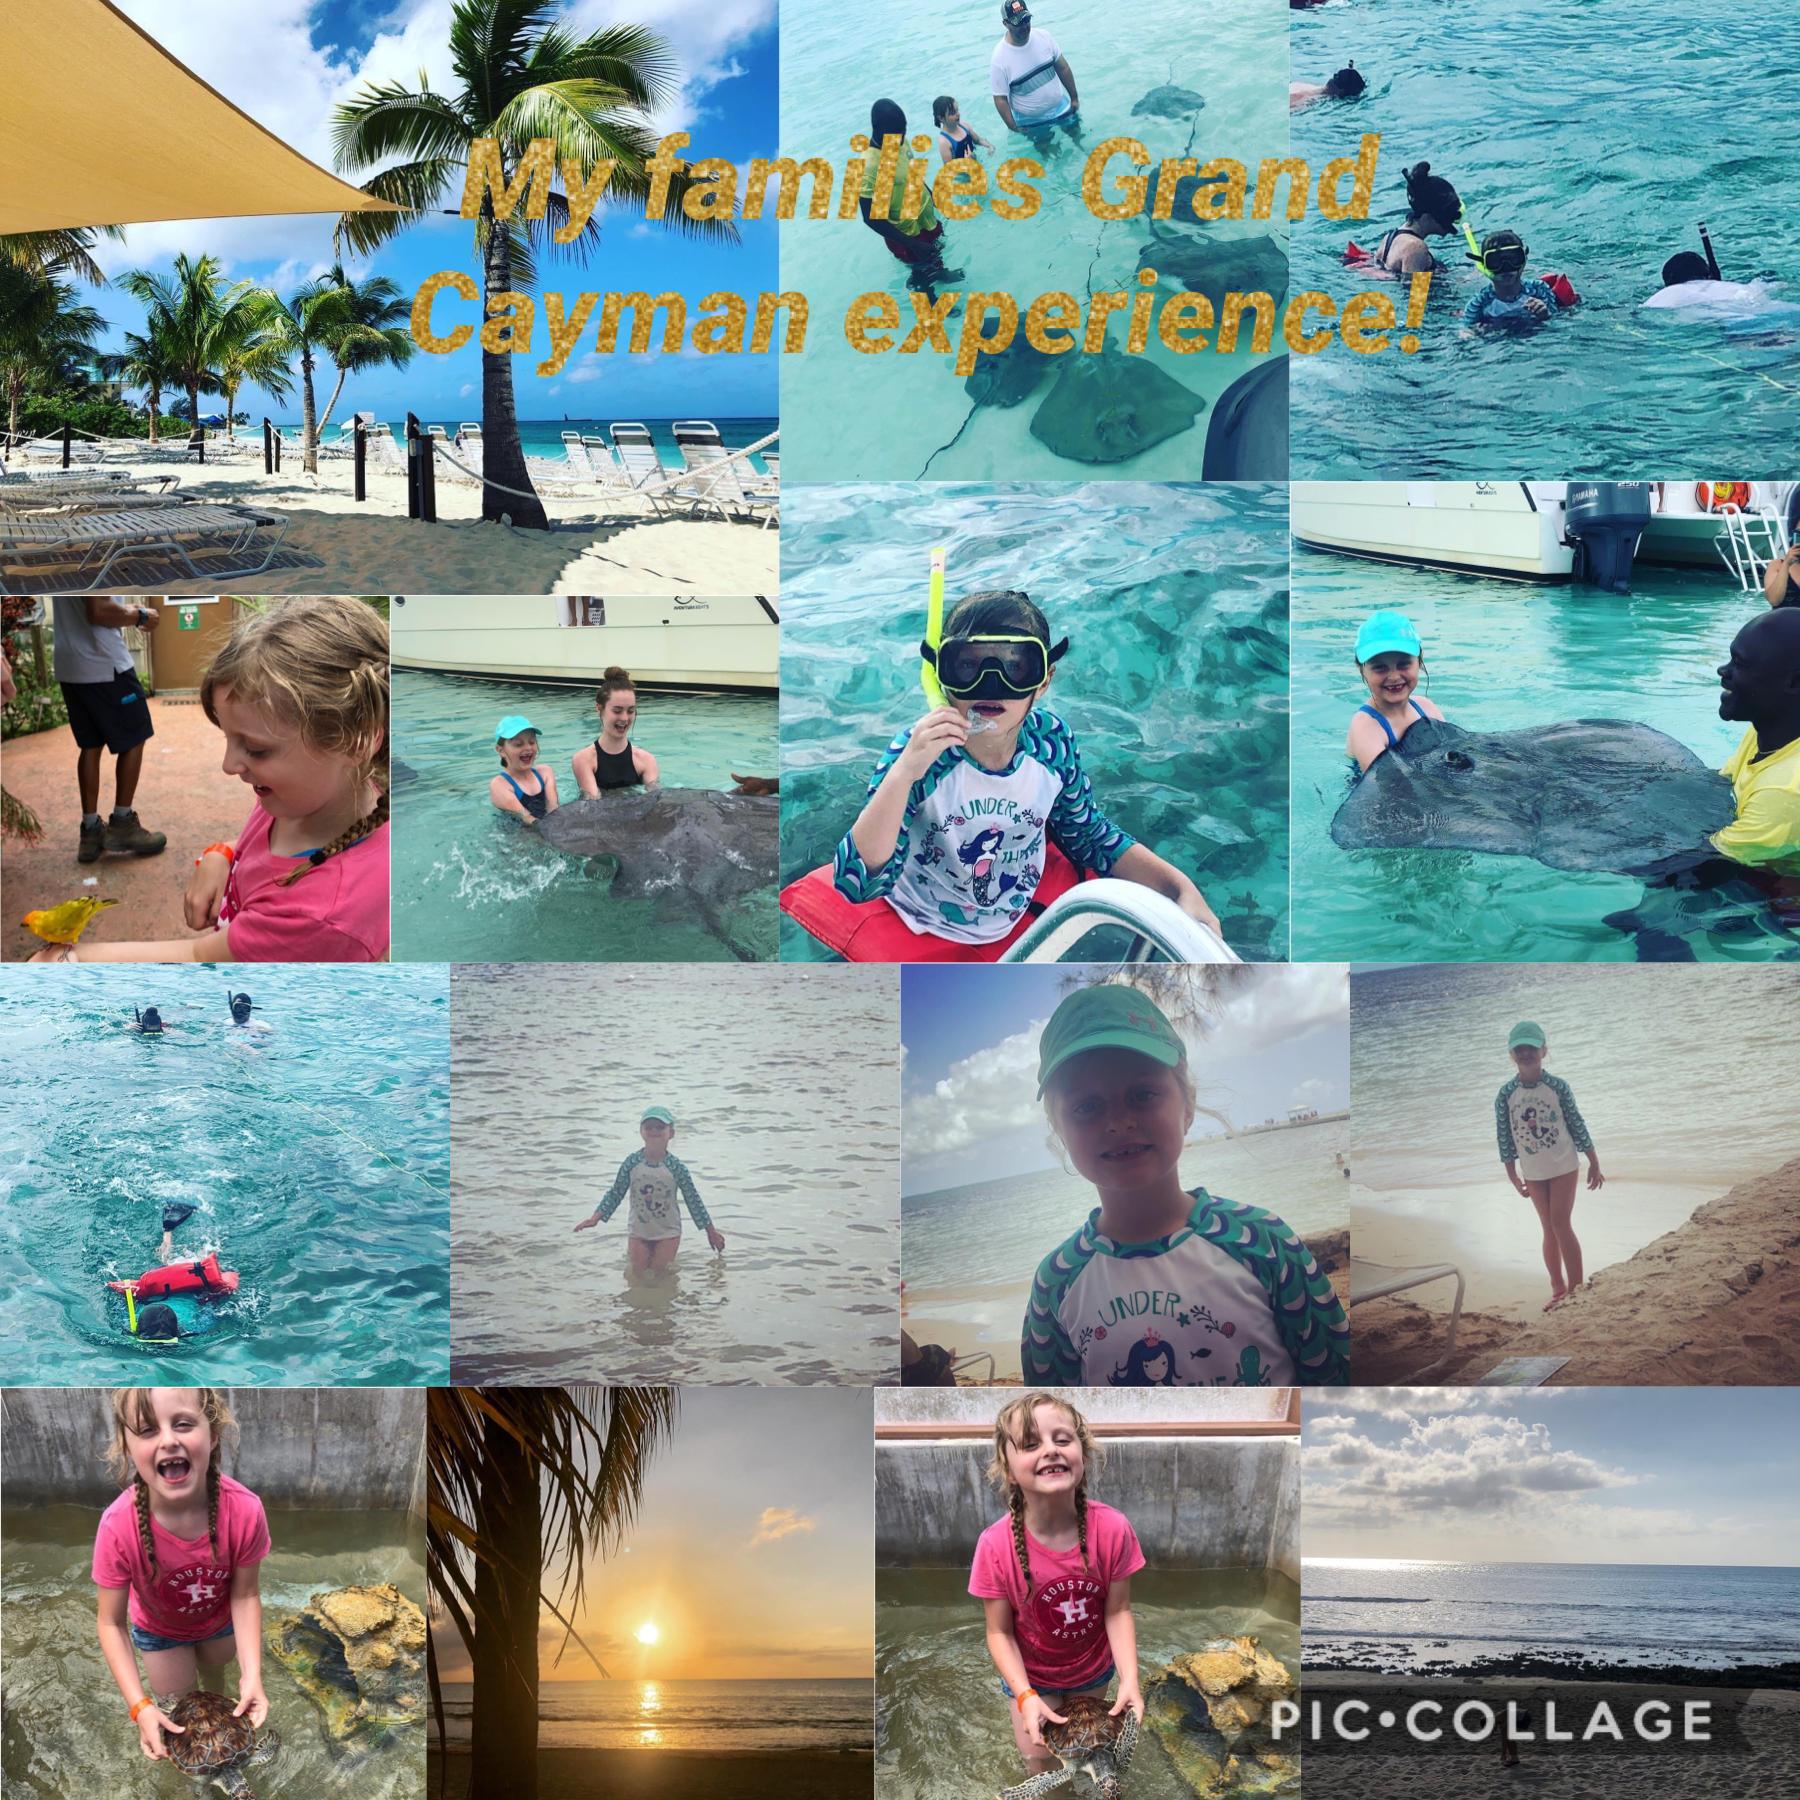 My families Grand Cayman experience








This is for my schoolwork btw